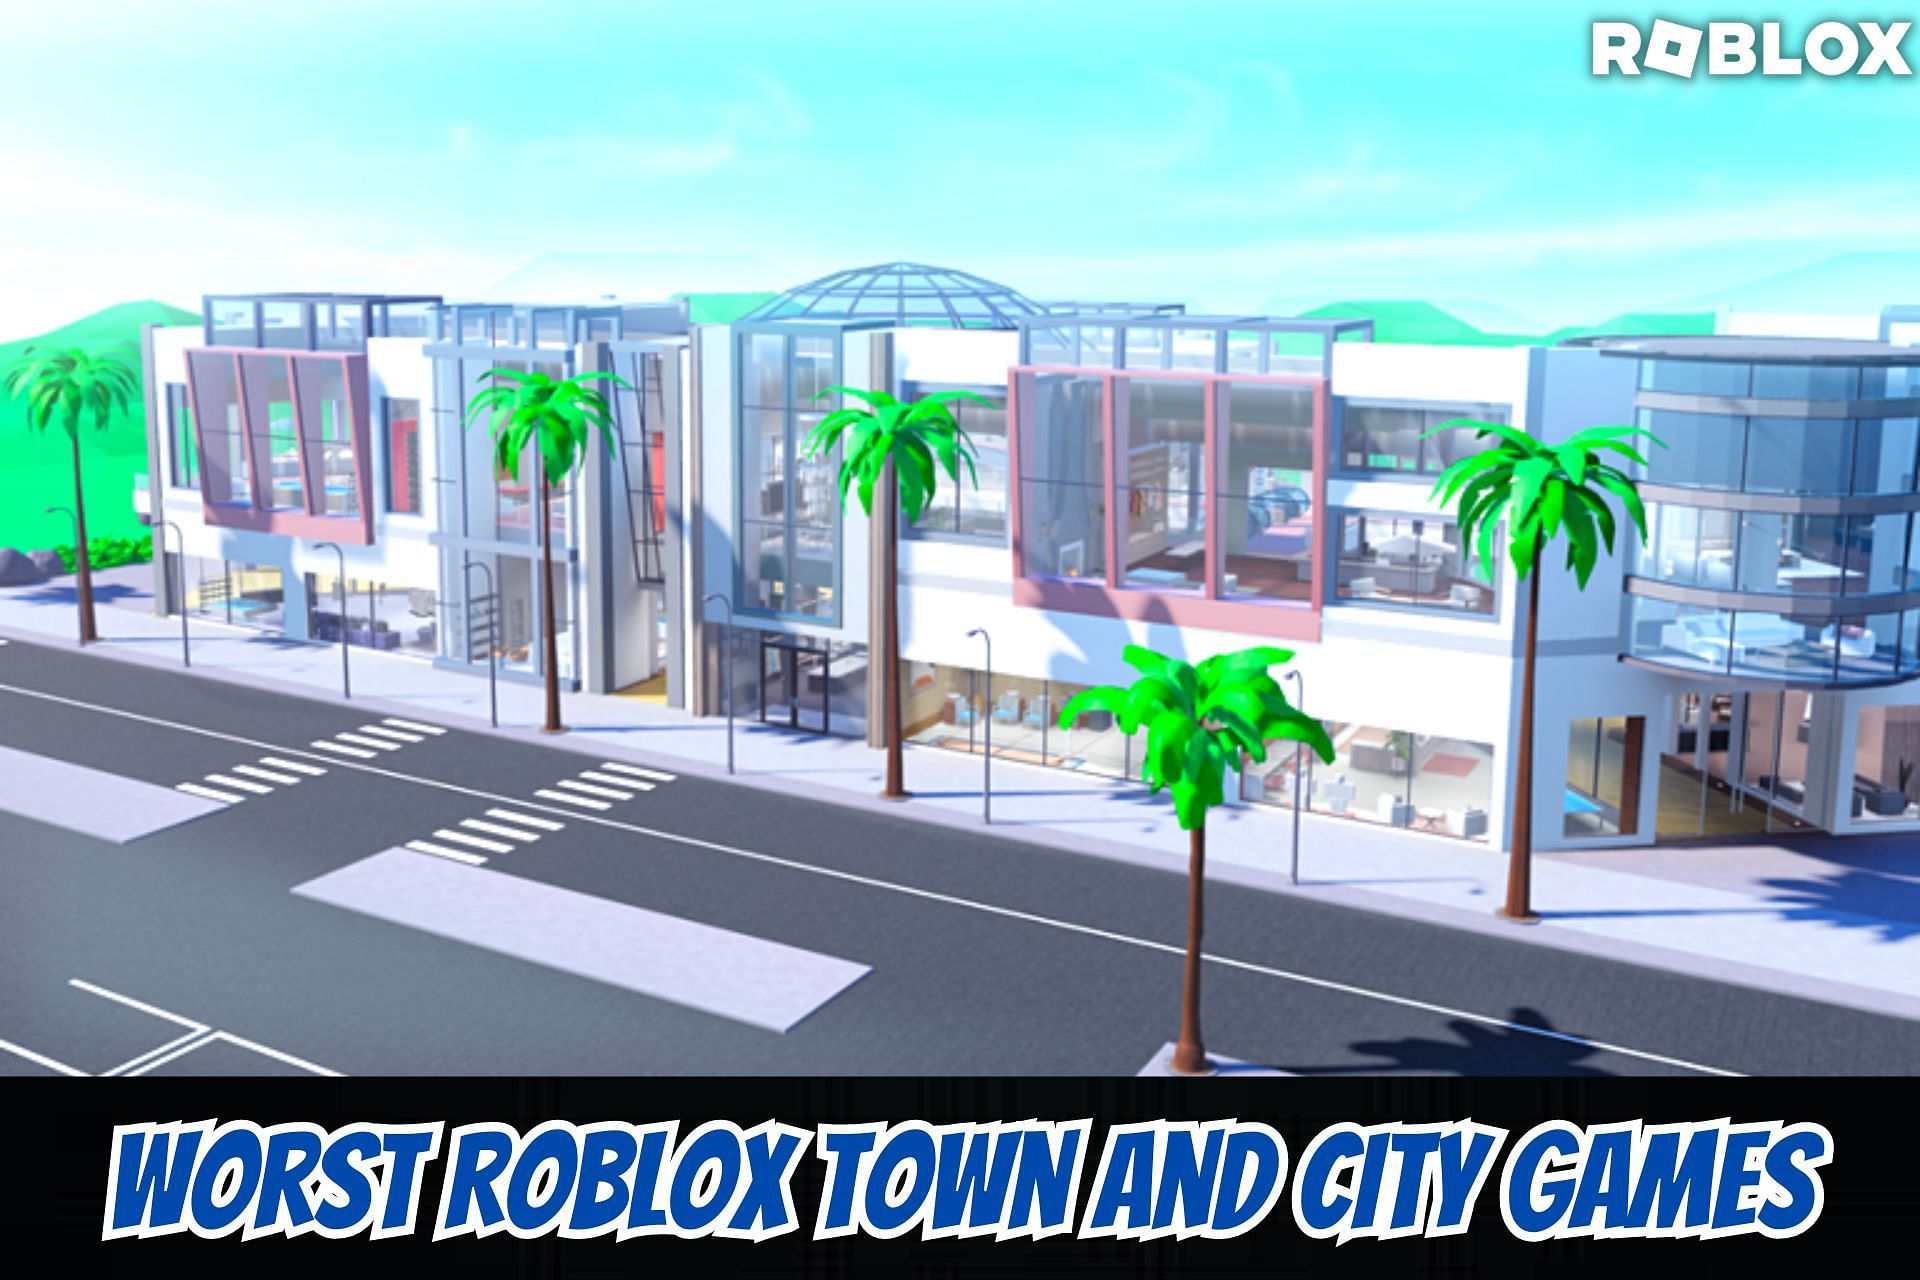 Worst Roblox Town and City Games